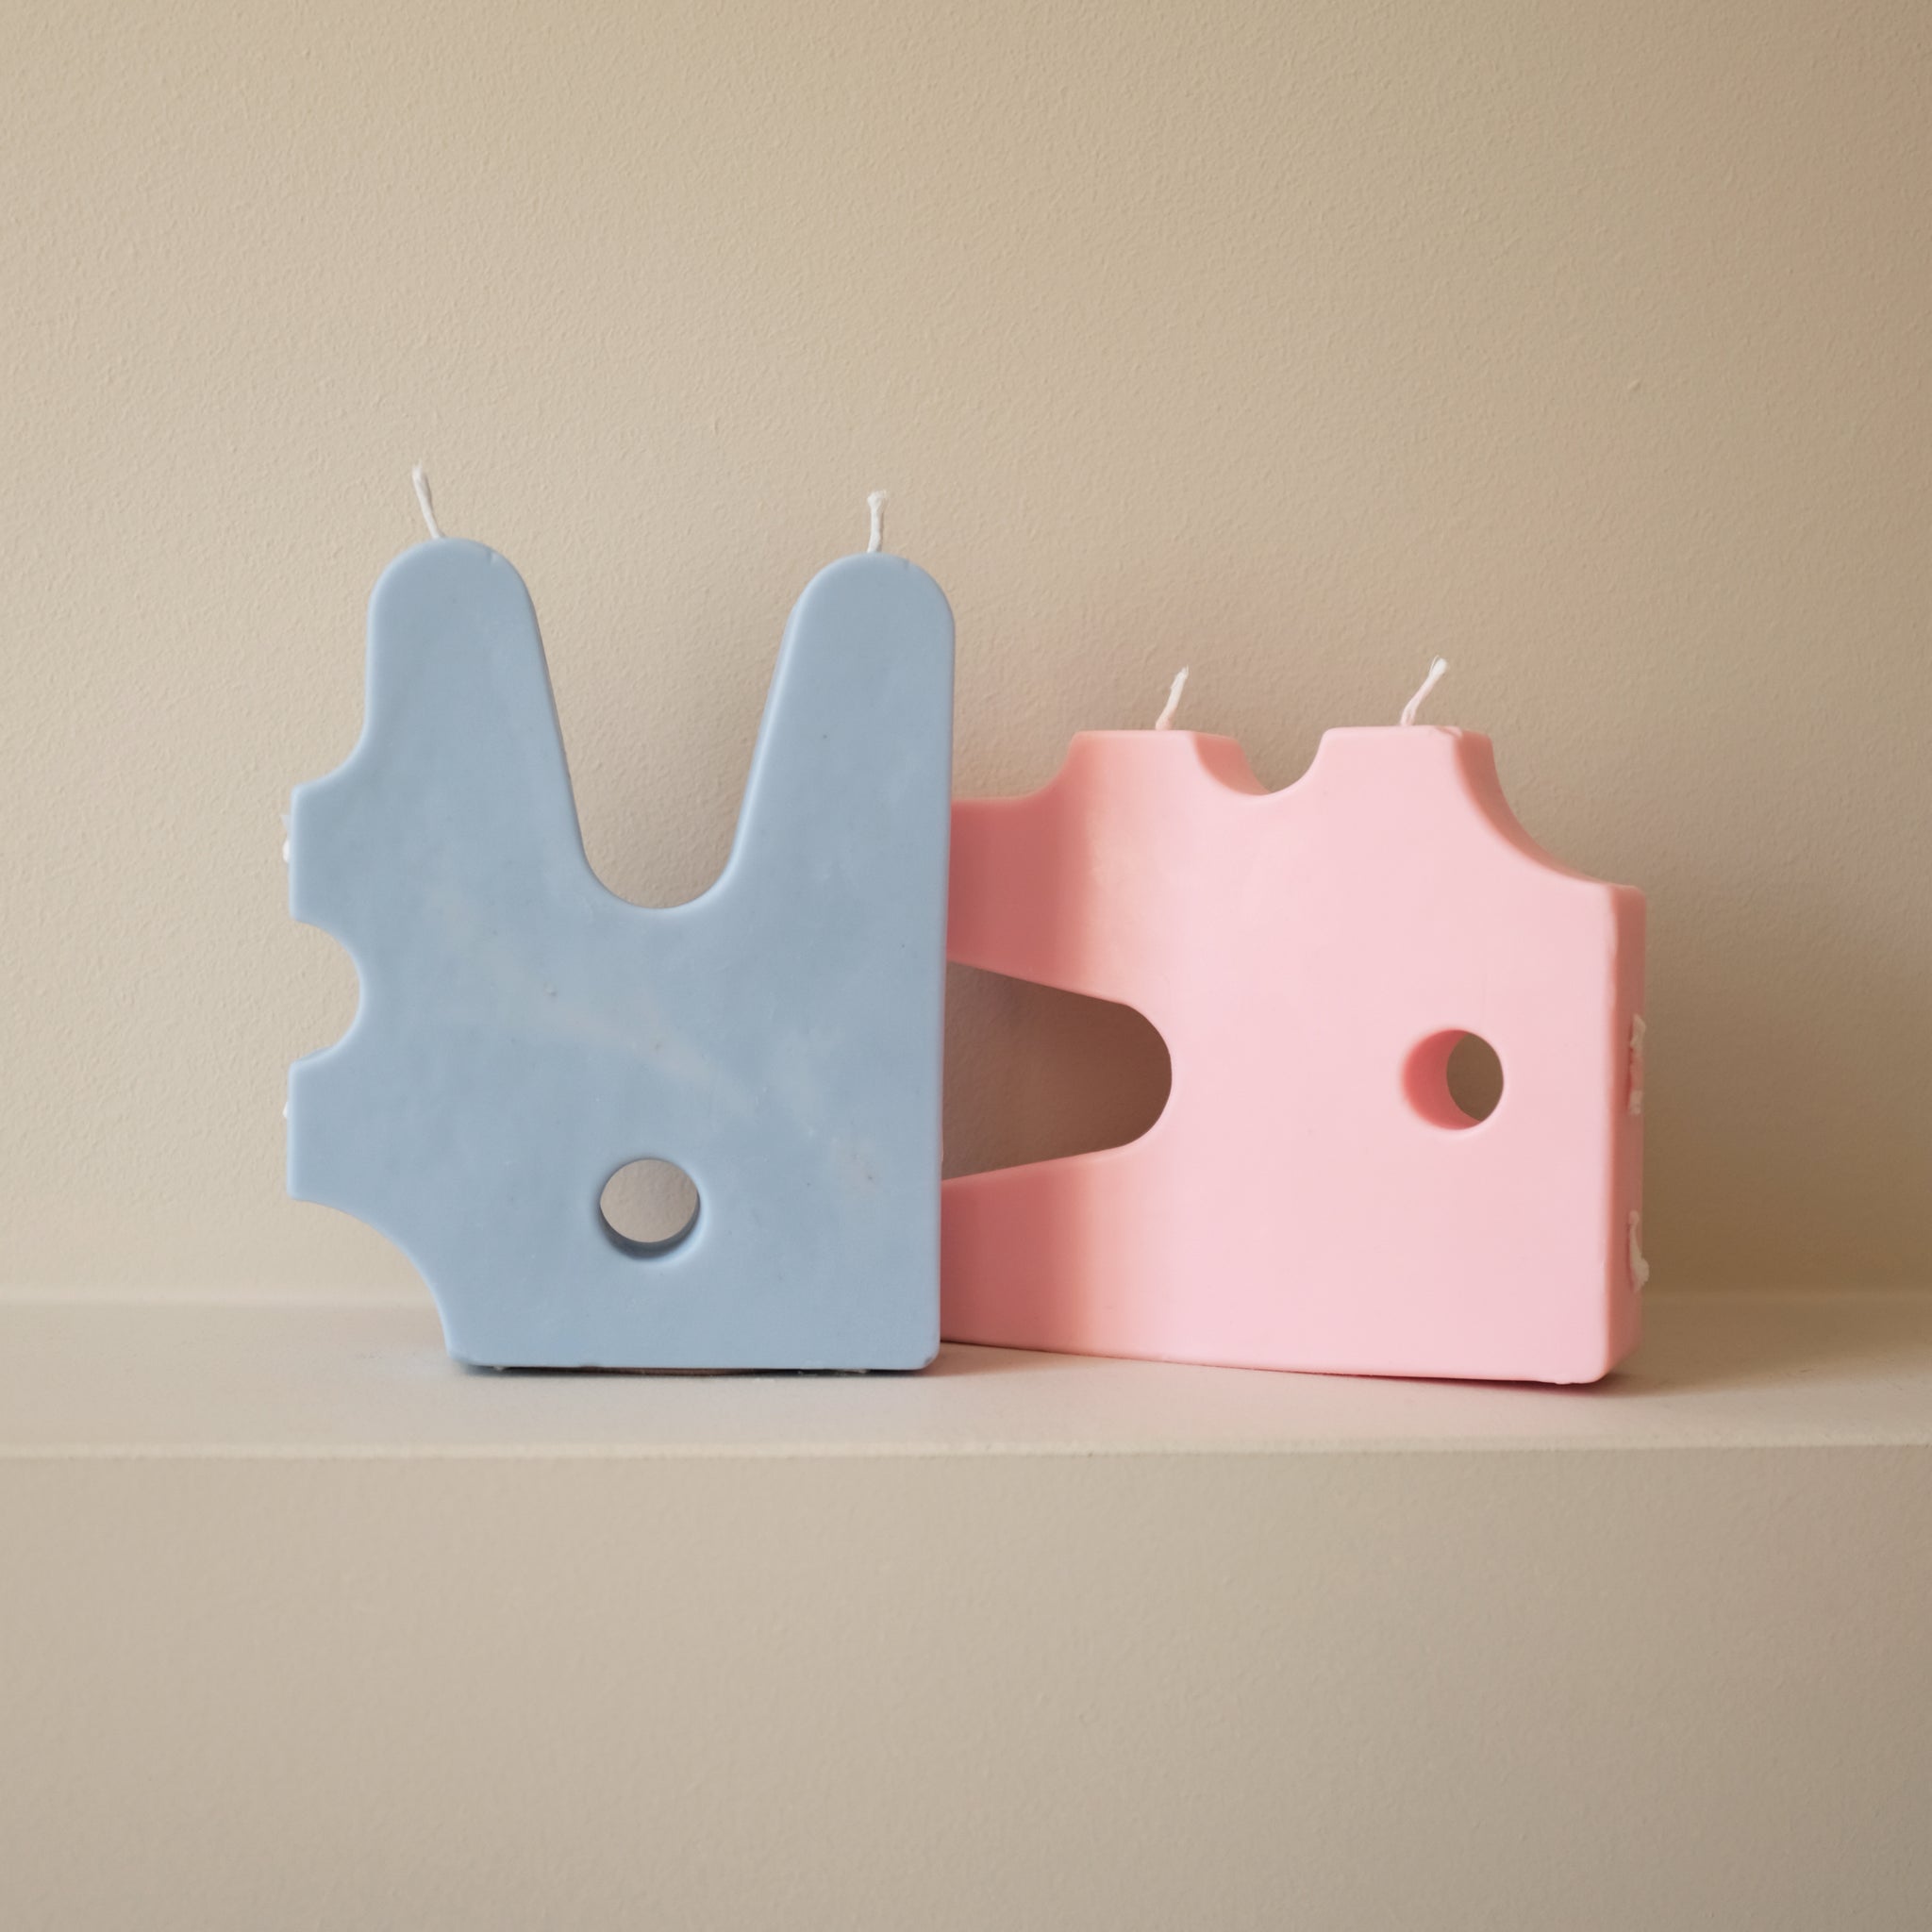 CANDLES COLLAB WITH PAMPA STUDIO BY THE MINIMONO PROJECT - BRAND FOR ECO FRIENDLY - PLAYFUL - MULTI FUNCTIONAL - SUSTAINABLE - HIGH QUALITY - DESIGN FURNITURE FROM RECYCLED PLASTIC FOR BOTH ADULT AND CHILDREN MADE IN BERLIN GERMANY